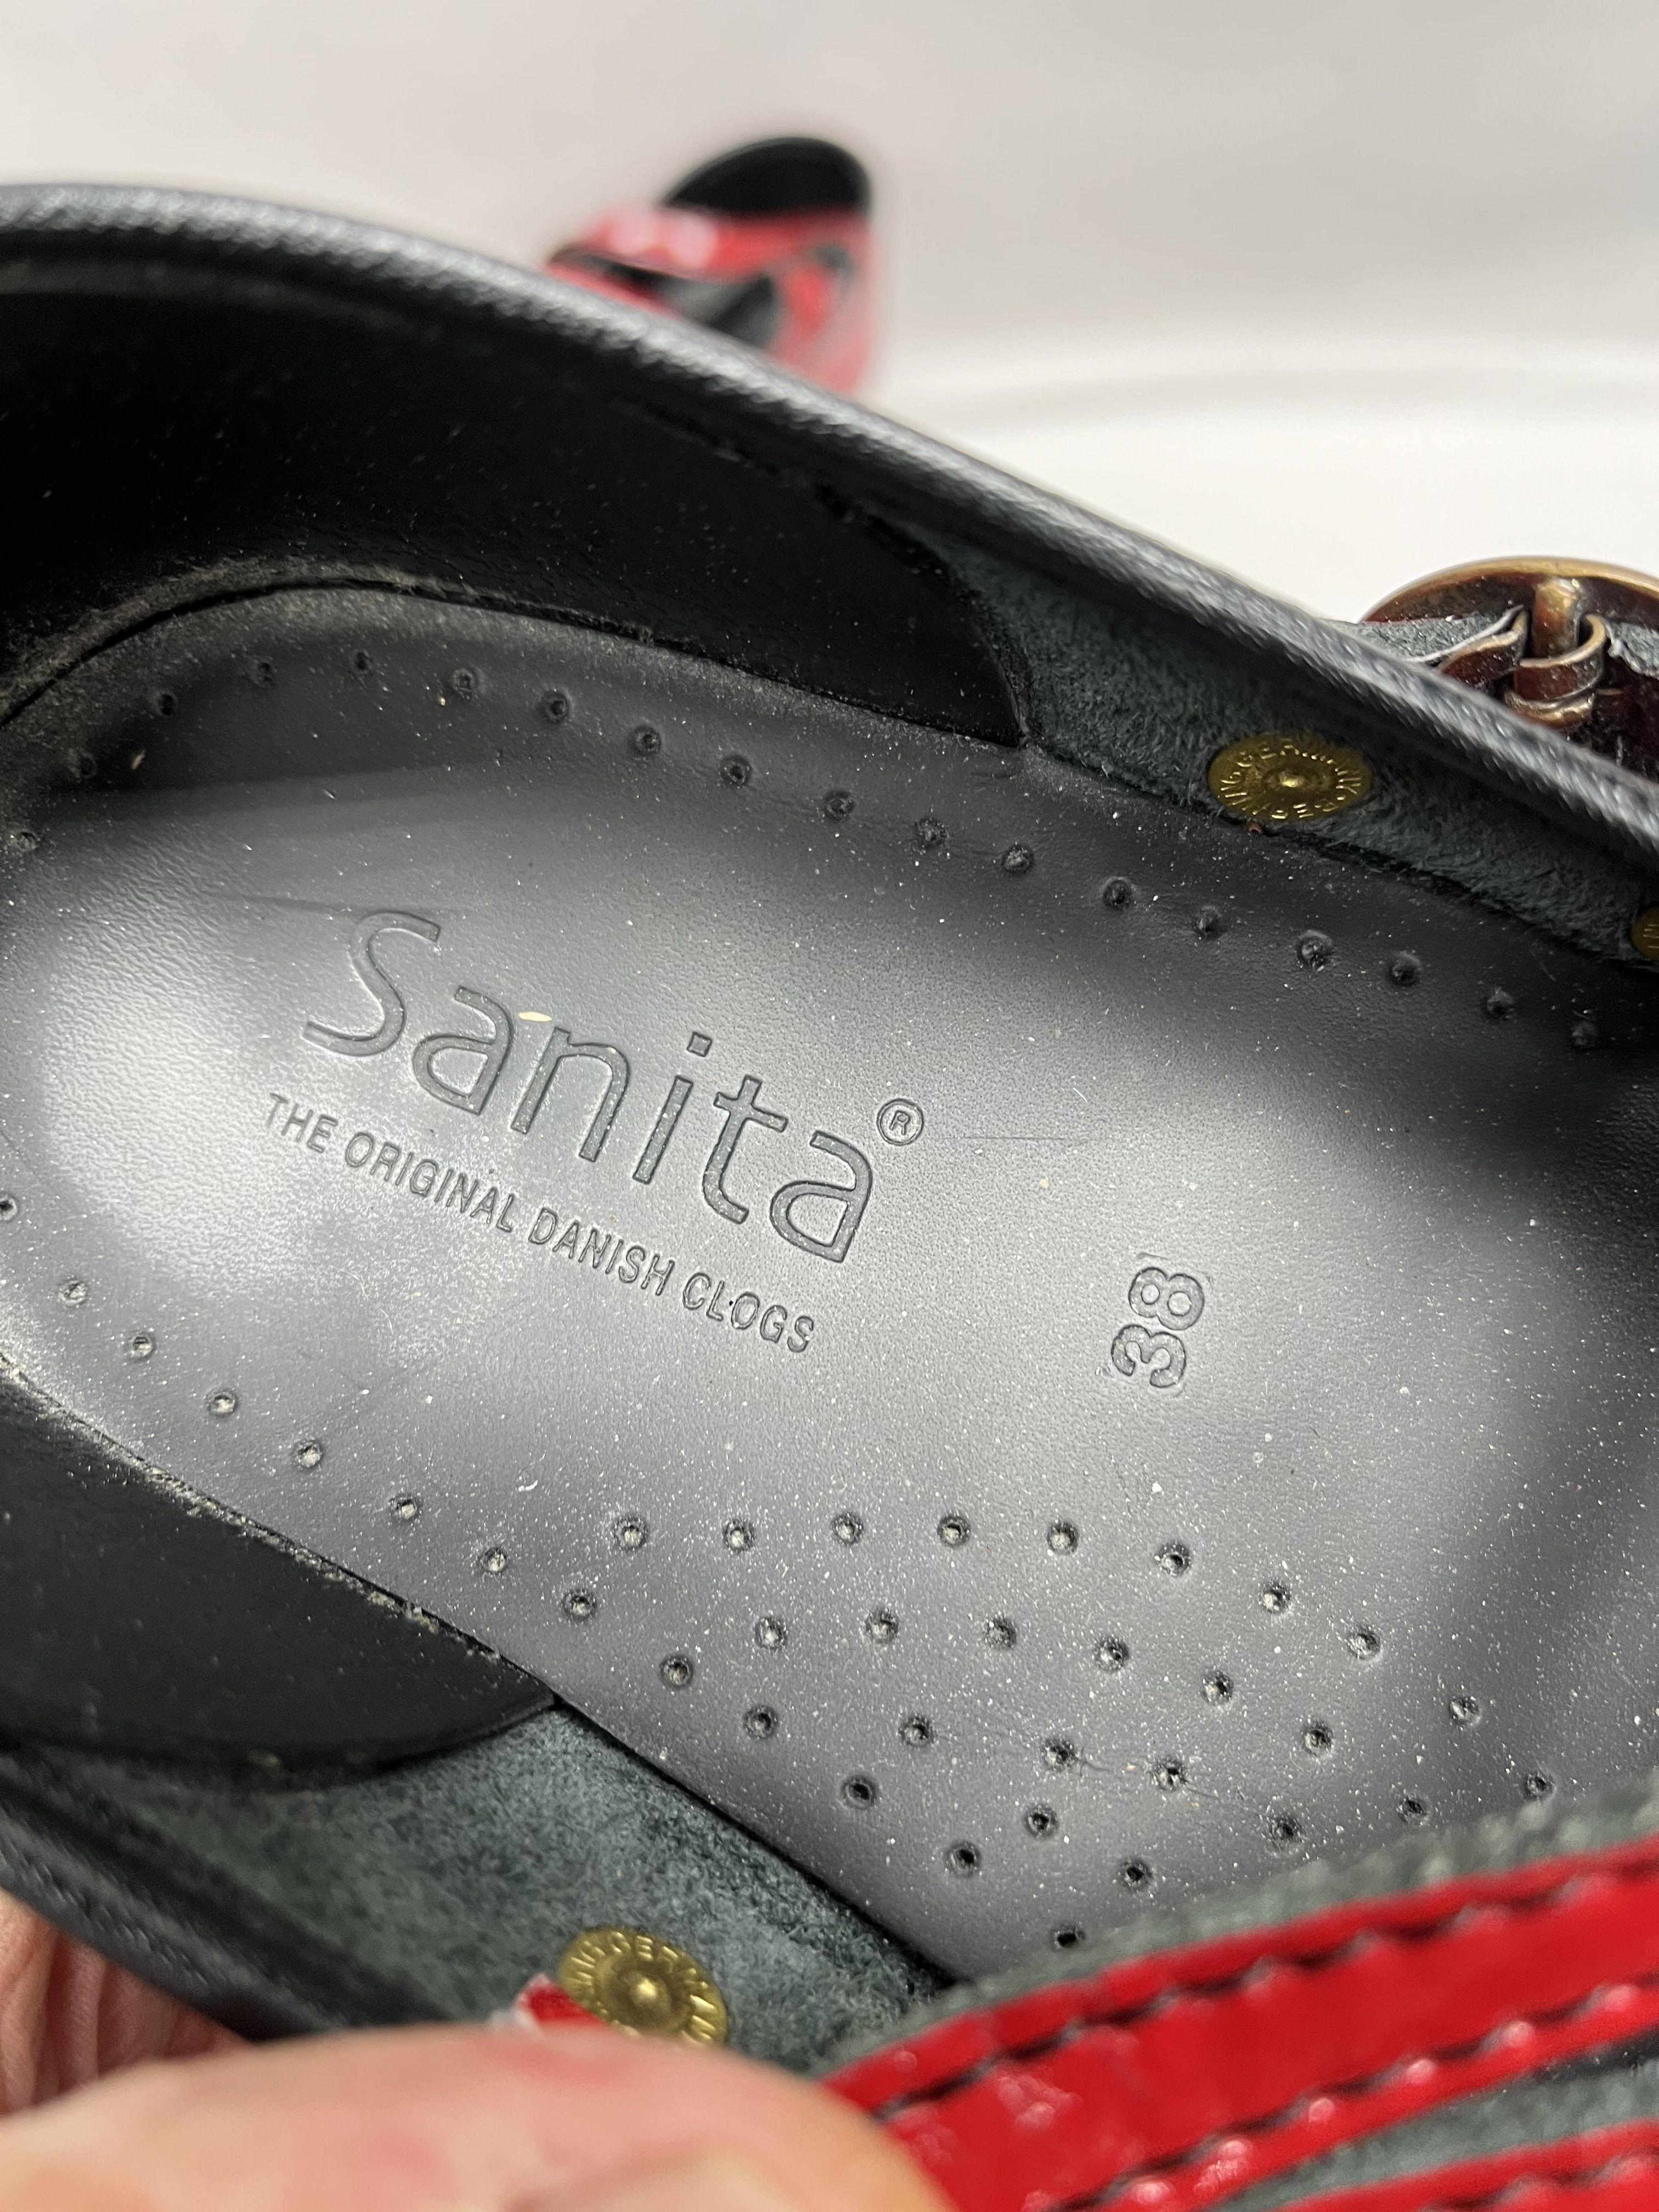 (4) Pair of Womens Shoes/Size 38 (Dansco and Sanita